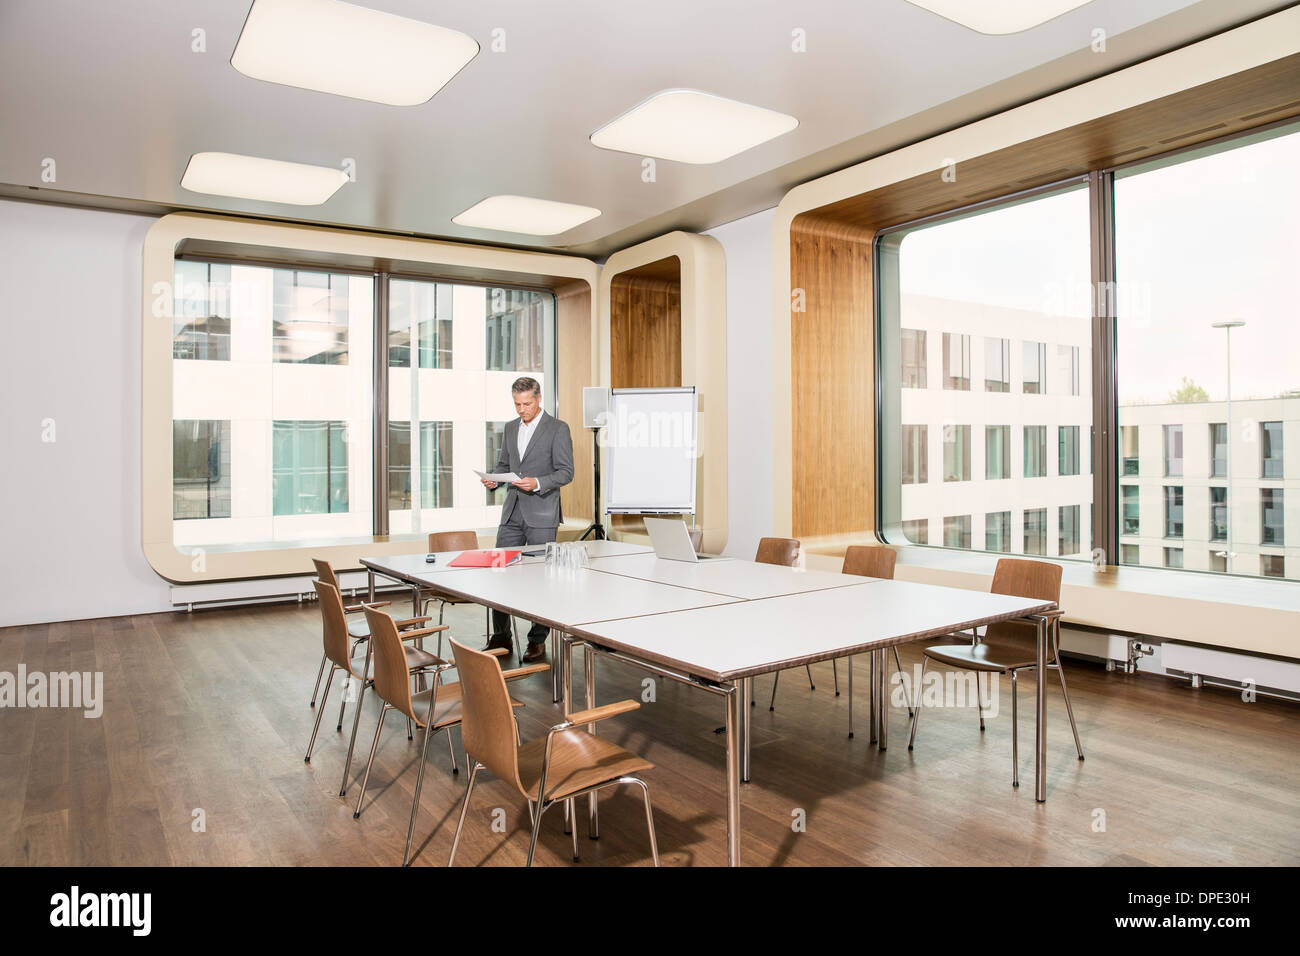 Businessman standing in conference room Banque D'Images